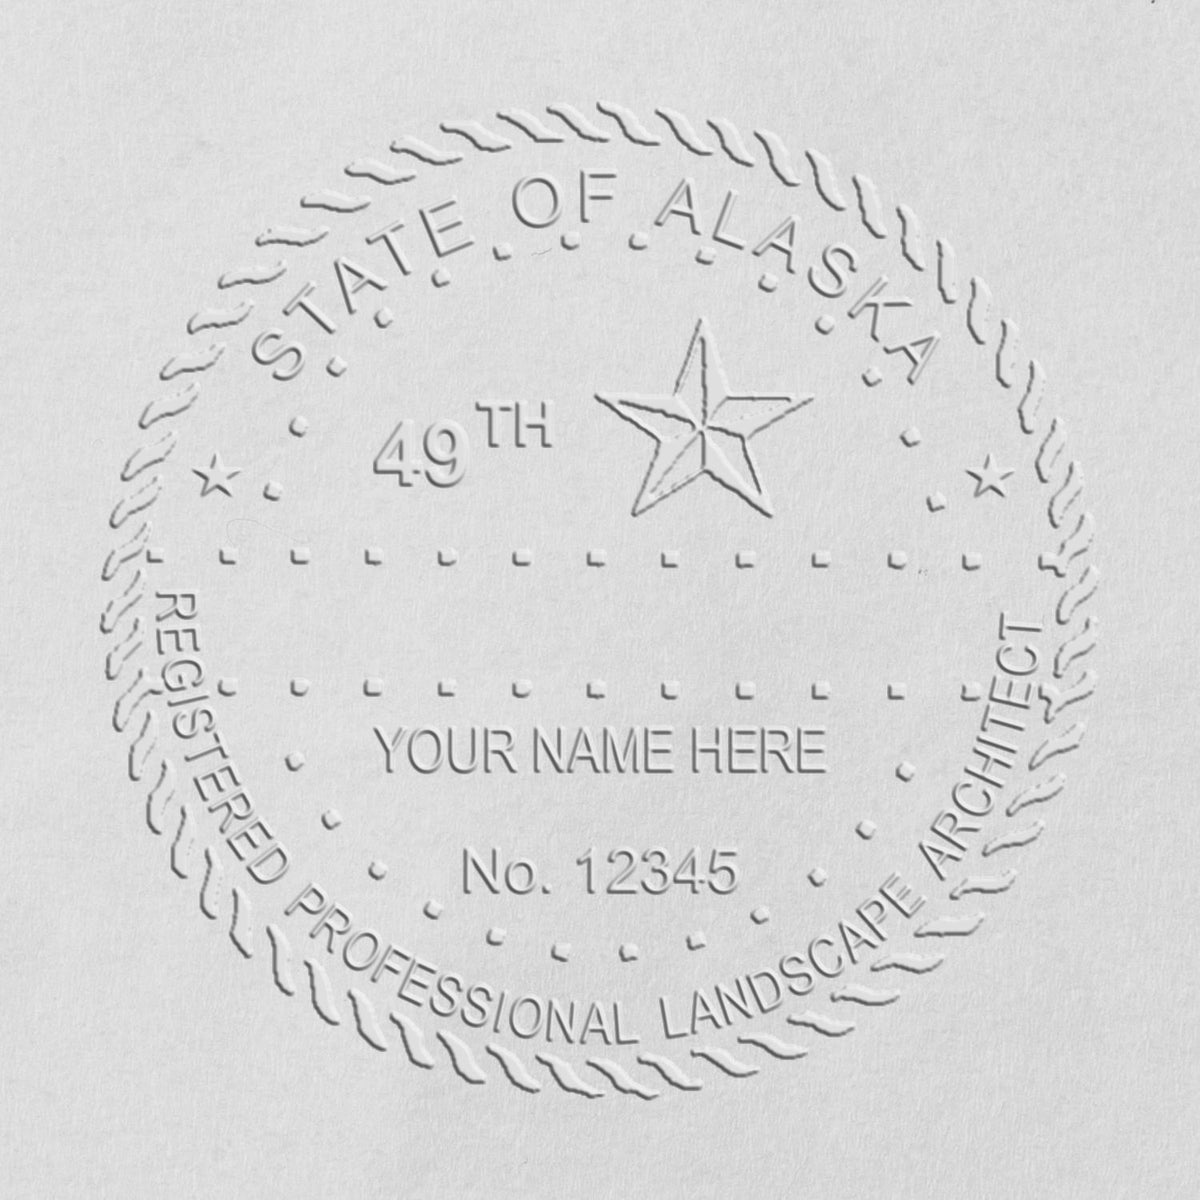 A stamped imprint of the Gift Alaska Landscape Architect Seal in this stylish lifestyle photo, setting the tone for a unique and personalized product.